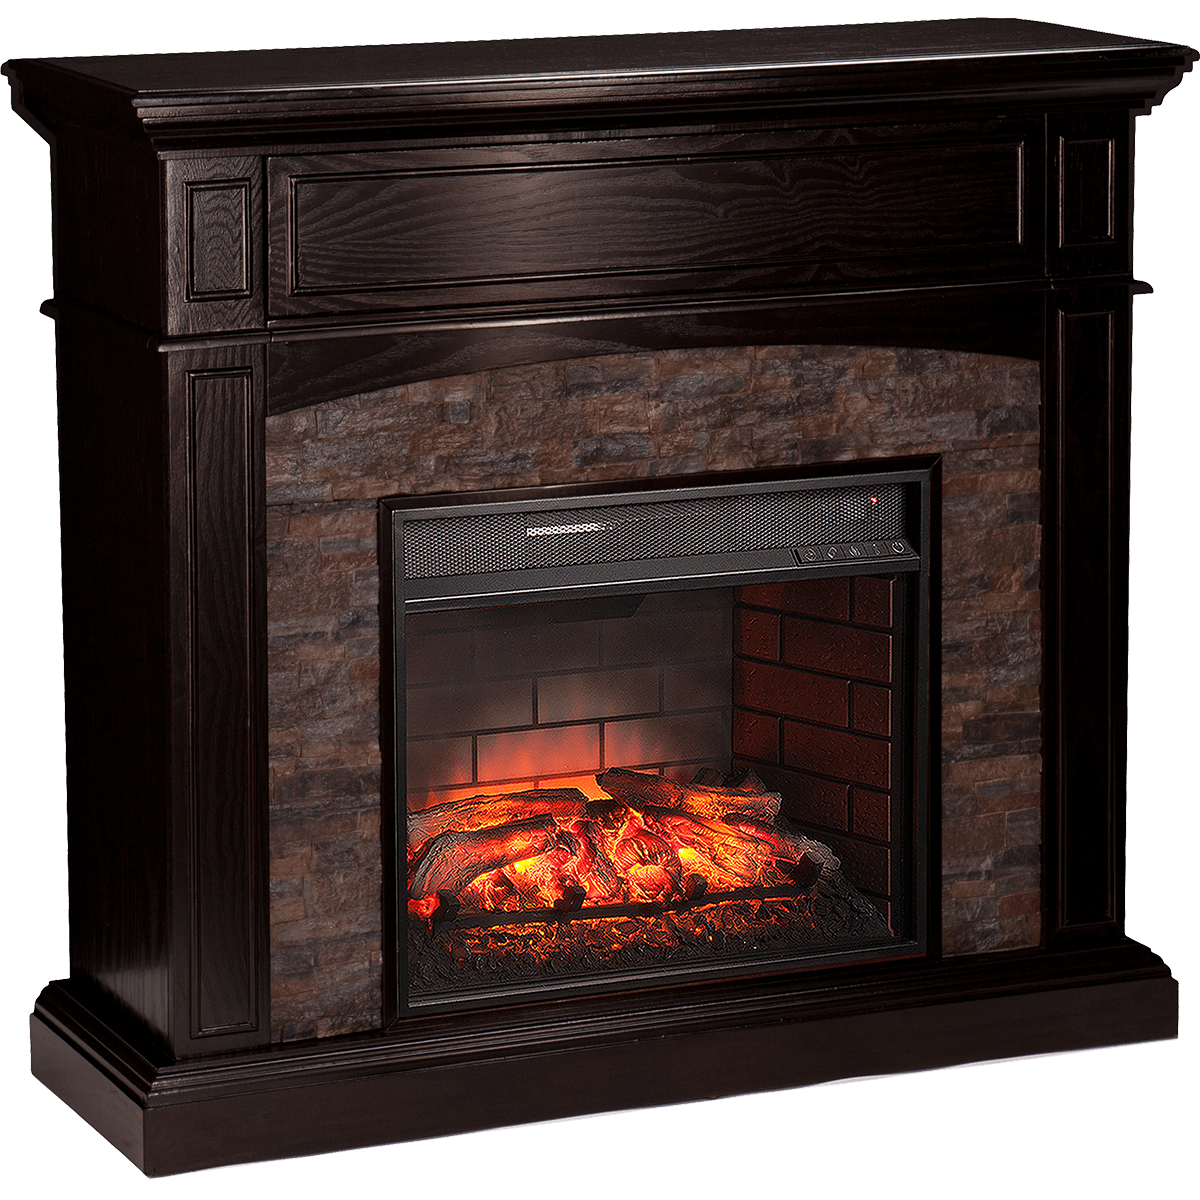 Buy the Southern Enterprises (SEI) Grantham Corner Media Console Fireplace at Sylvane.com today and get Free Shipping & 30-day returns on your order.